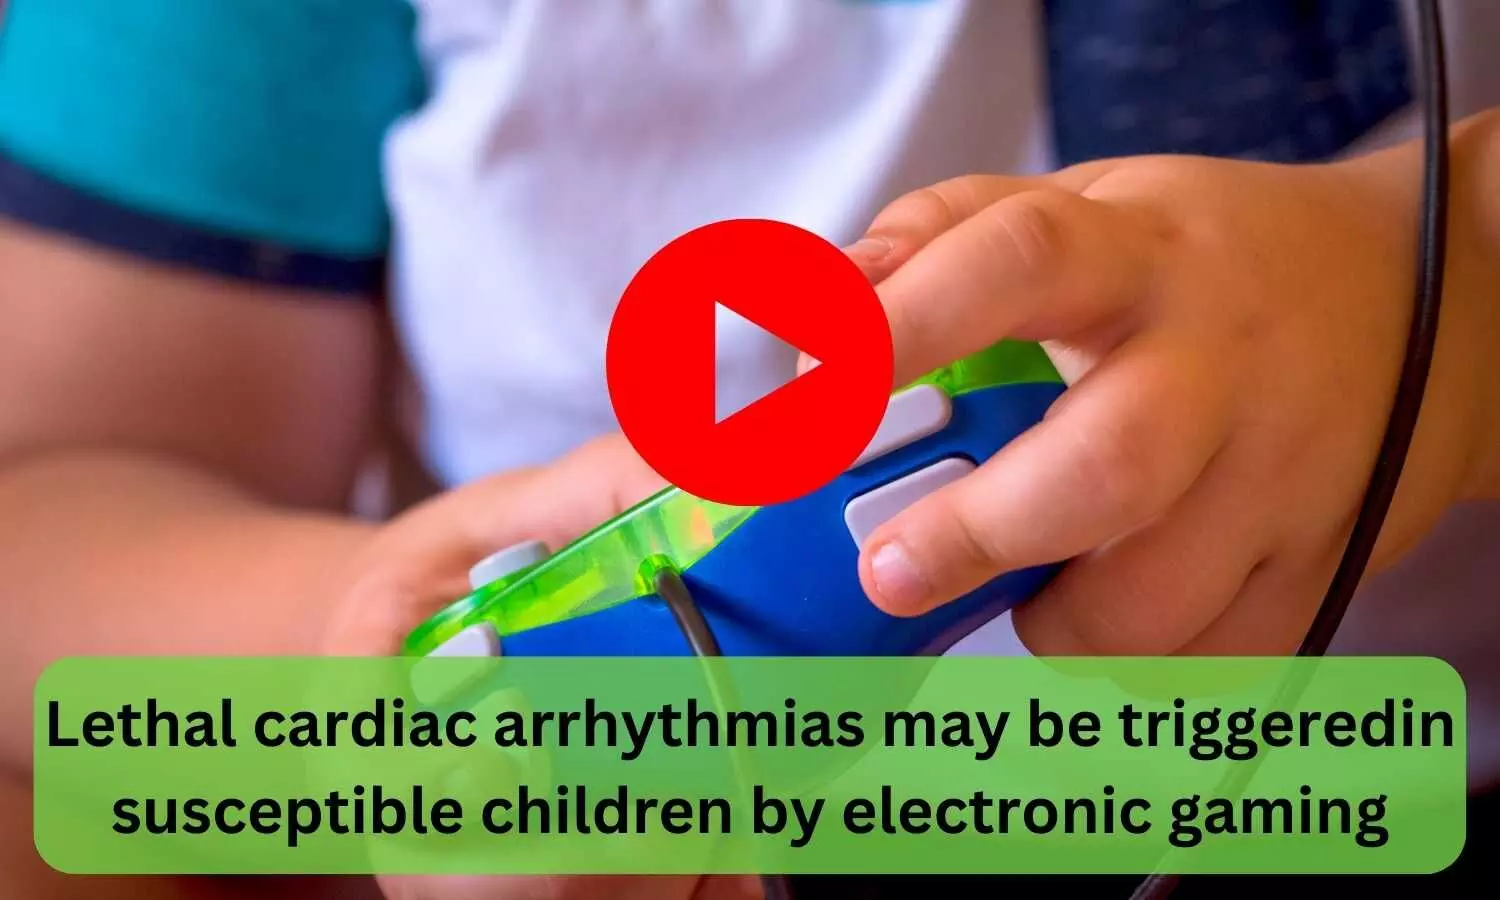 Lethal cardiac arrhythmias may be triggered in susceptible children by electronic gaming